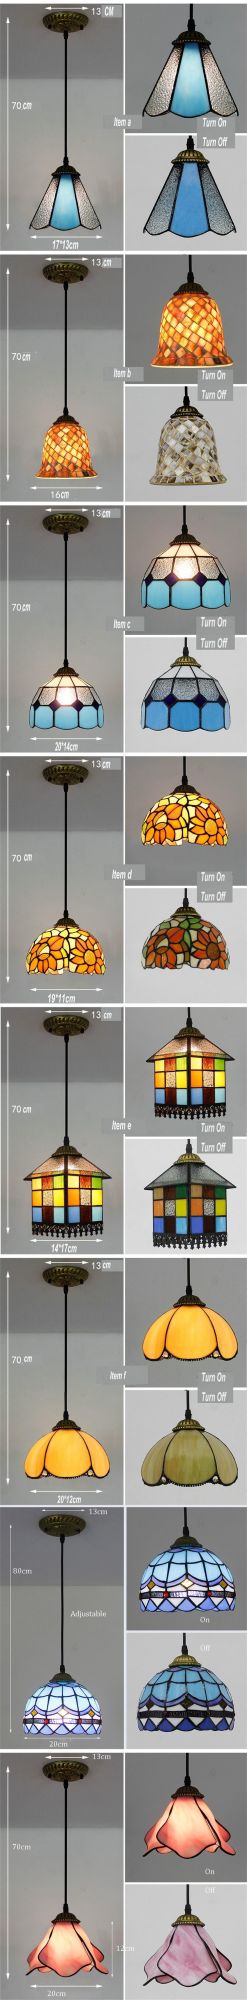 Tiffany Stained Glass Pendant Lights Vintage Mediterranean LED Kitchen Hanging Lamp Dining Room Stair Bar Home Lighting Fixtures